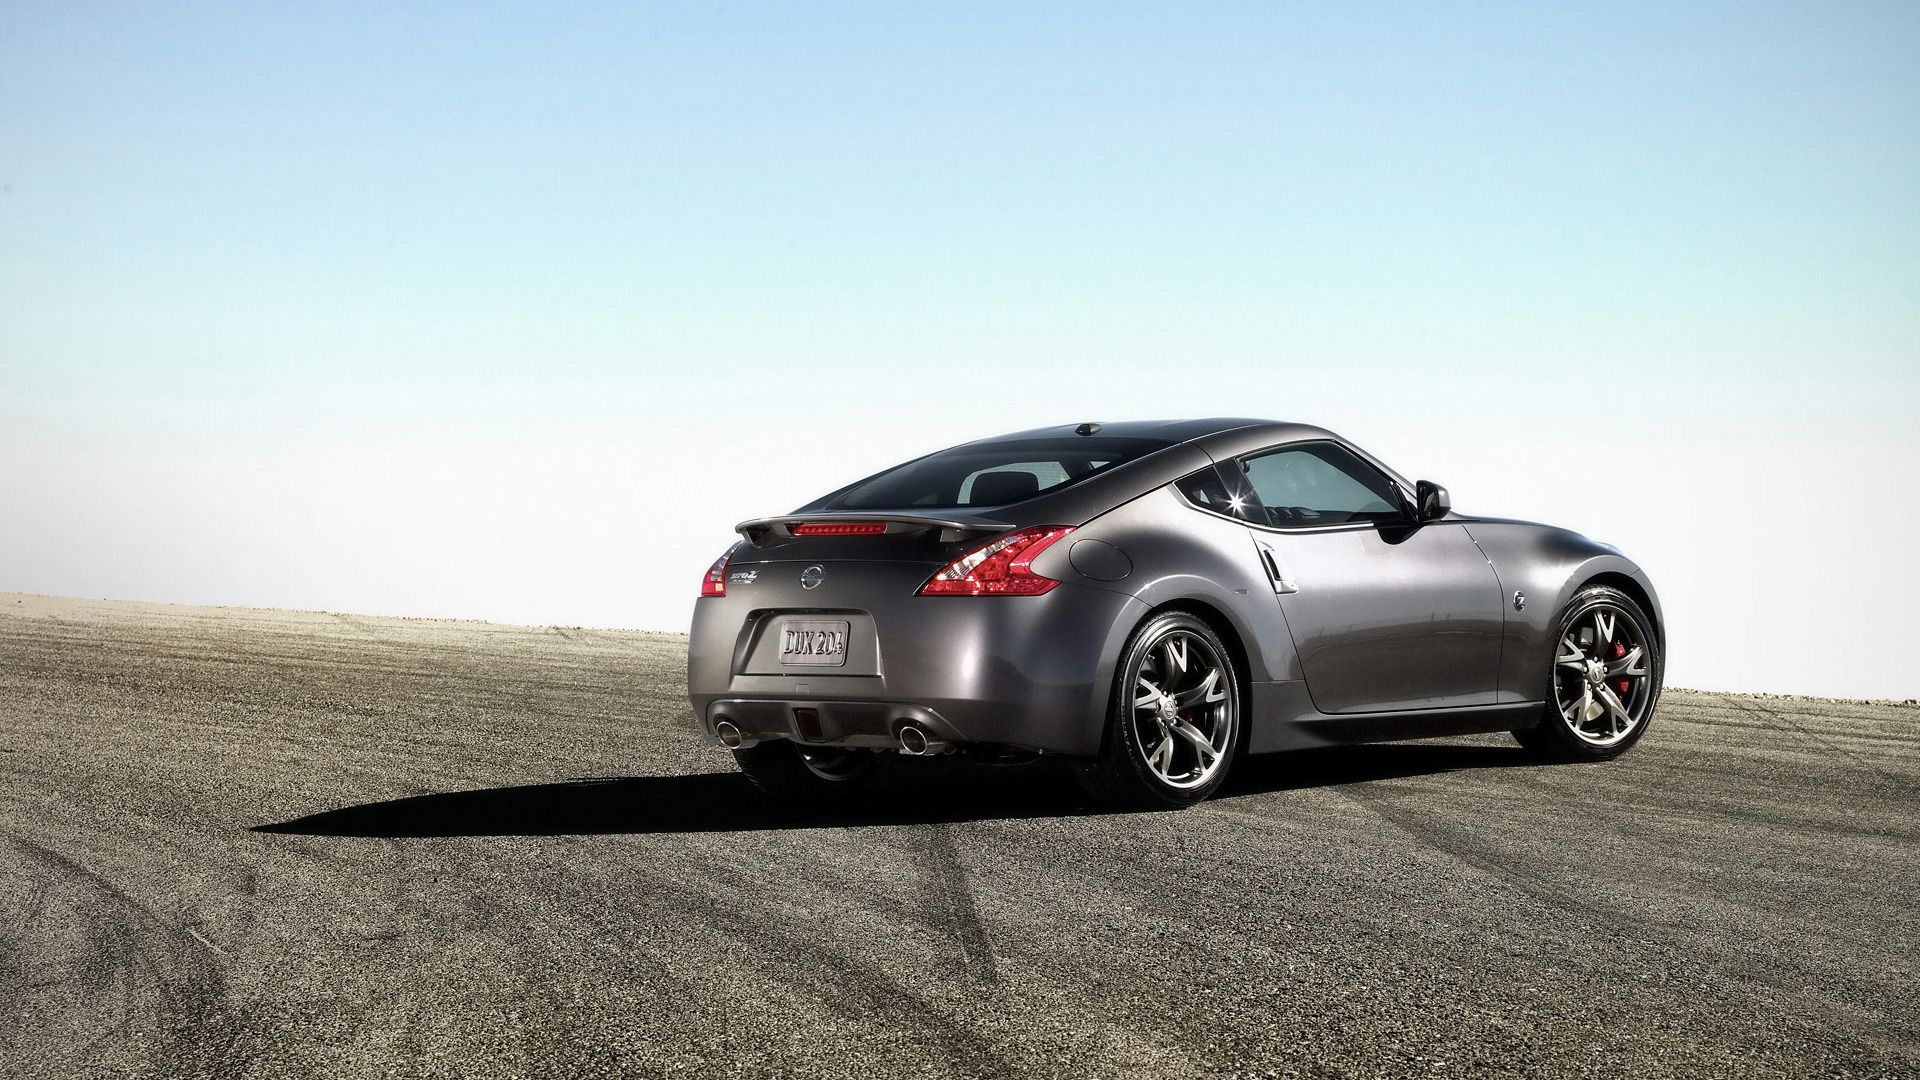 Awesome Nissan Car 1920X1080 Pixels Full HD Wallpaper Pack | Cars ...